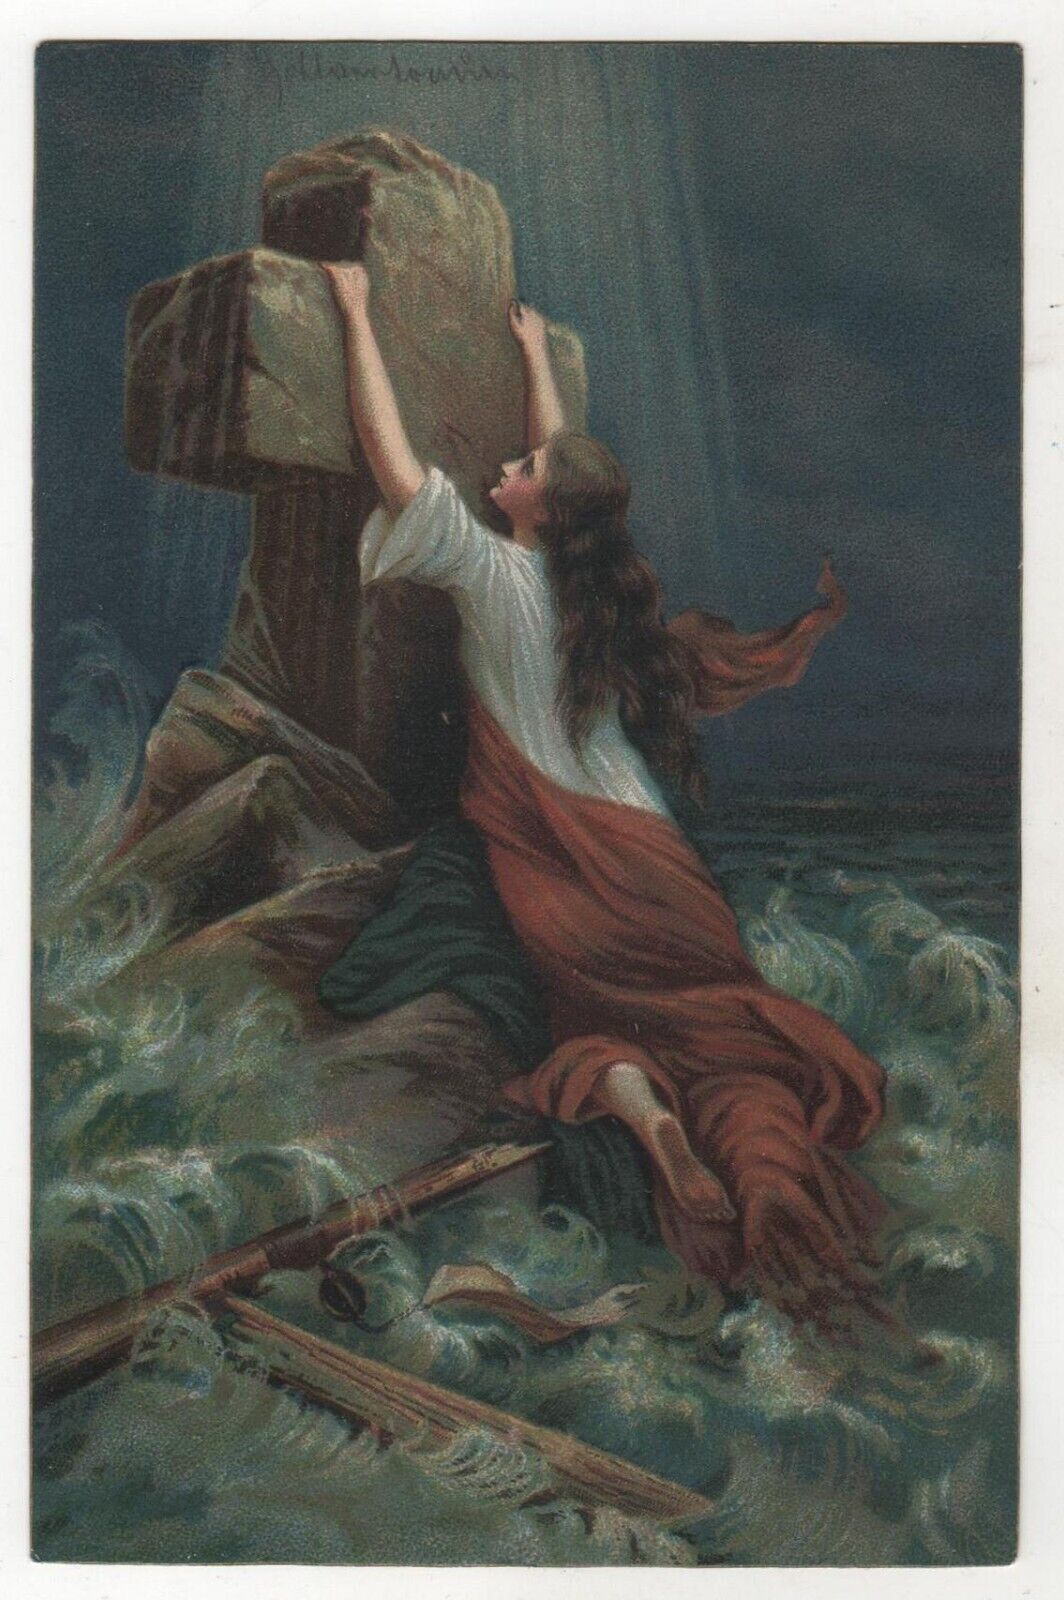 Antique Postcard Faith in God Woman clinging to the cross Storm Sea shipwreck